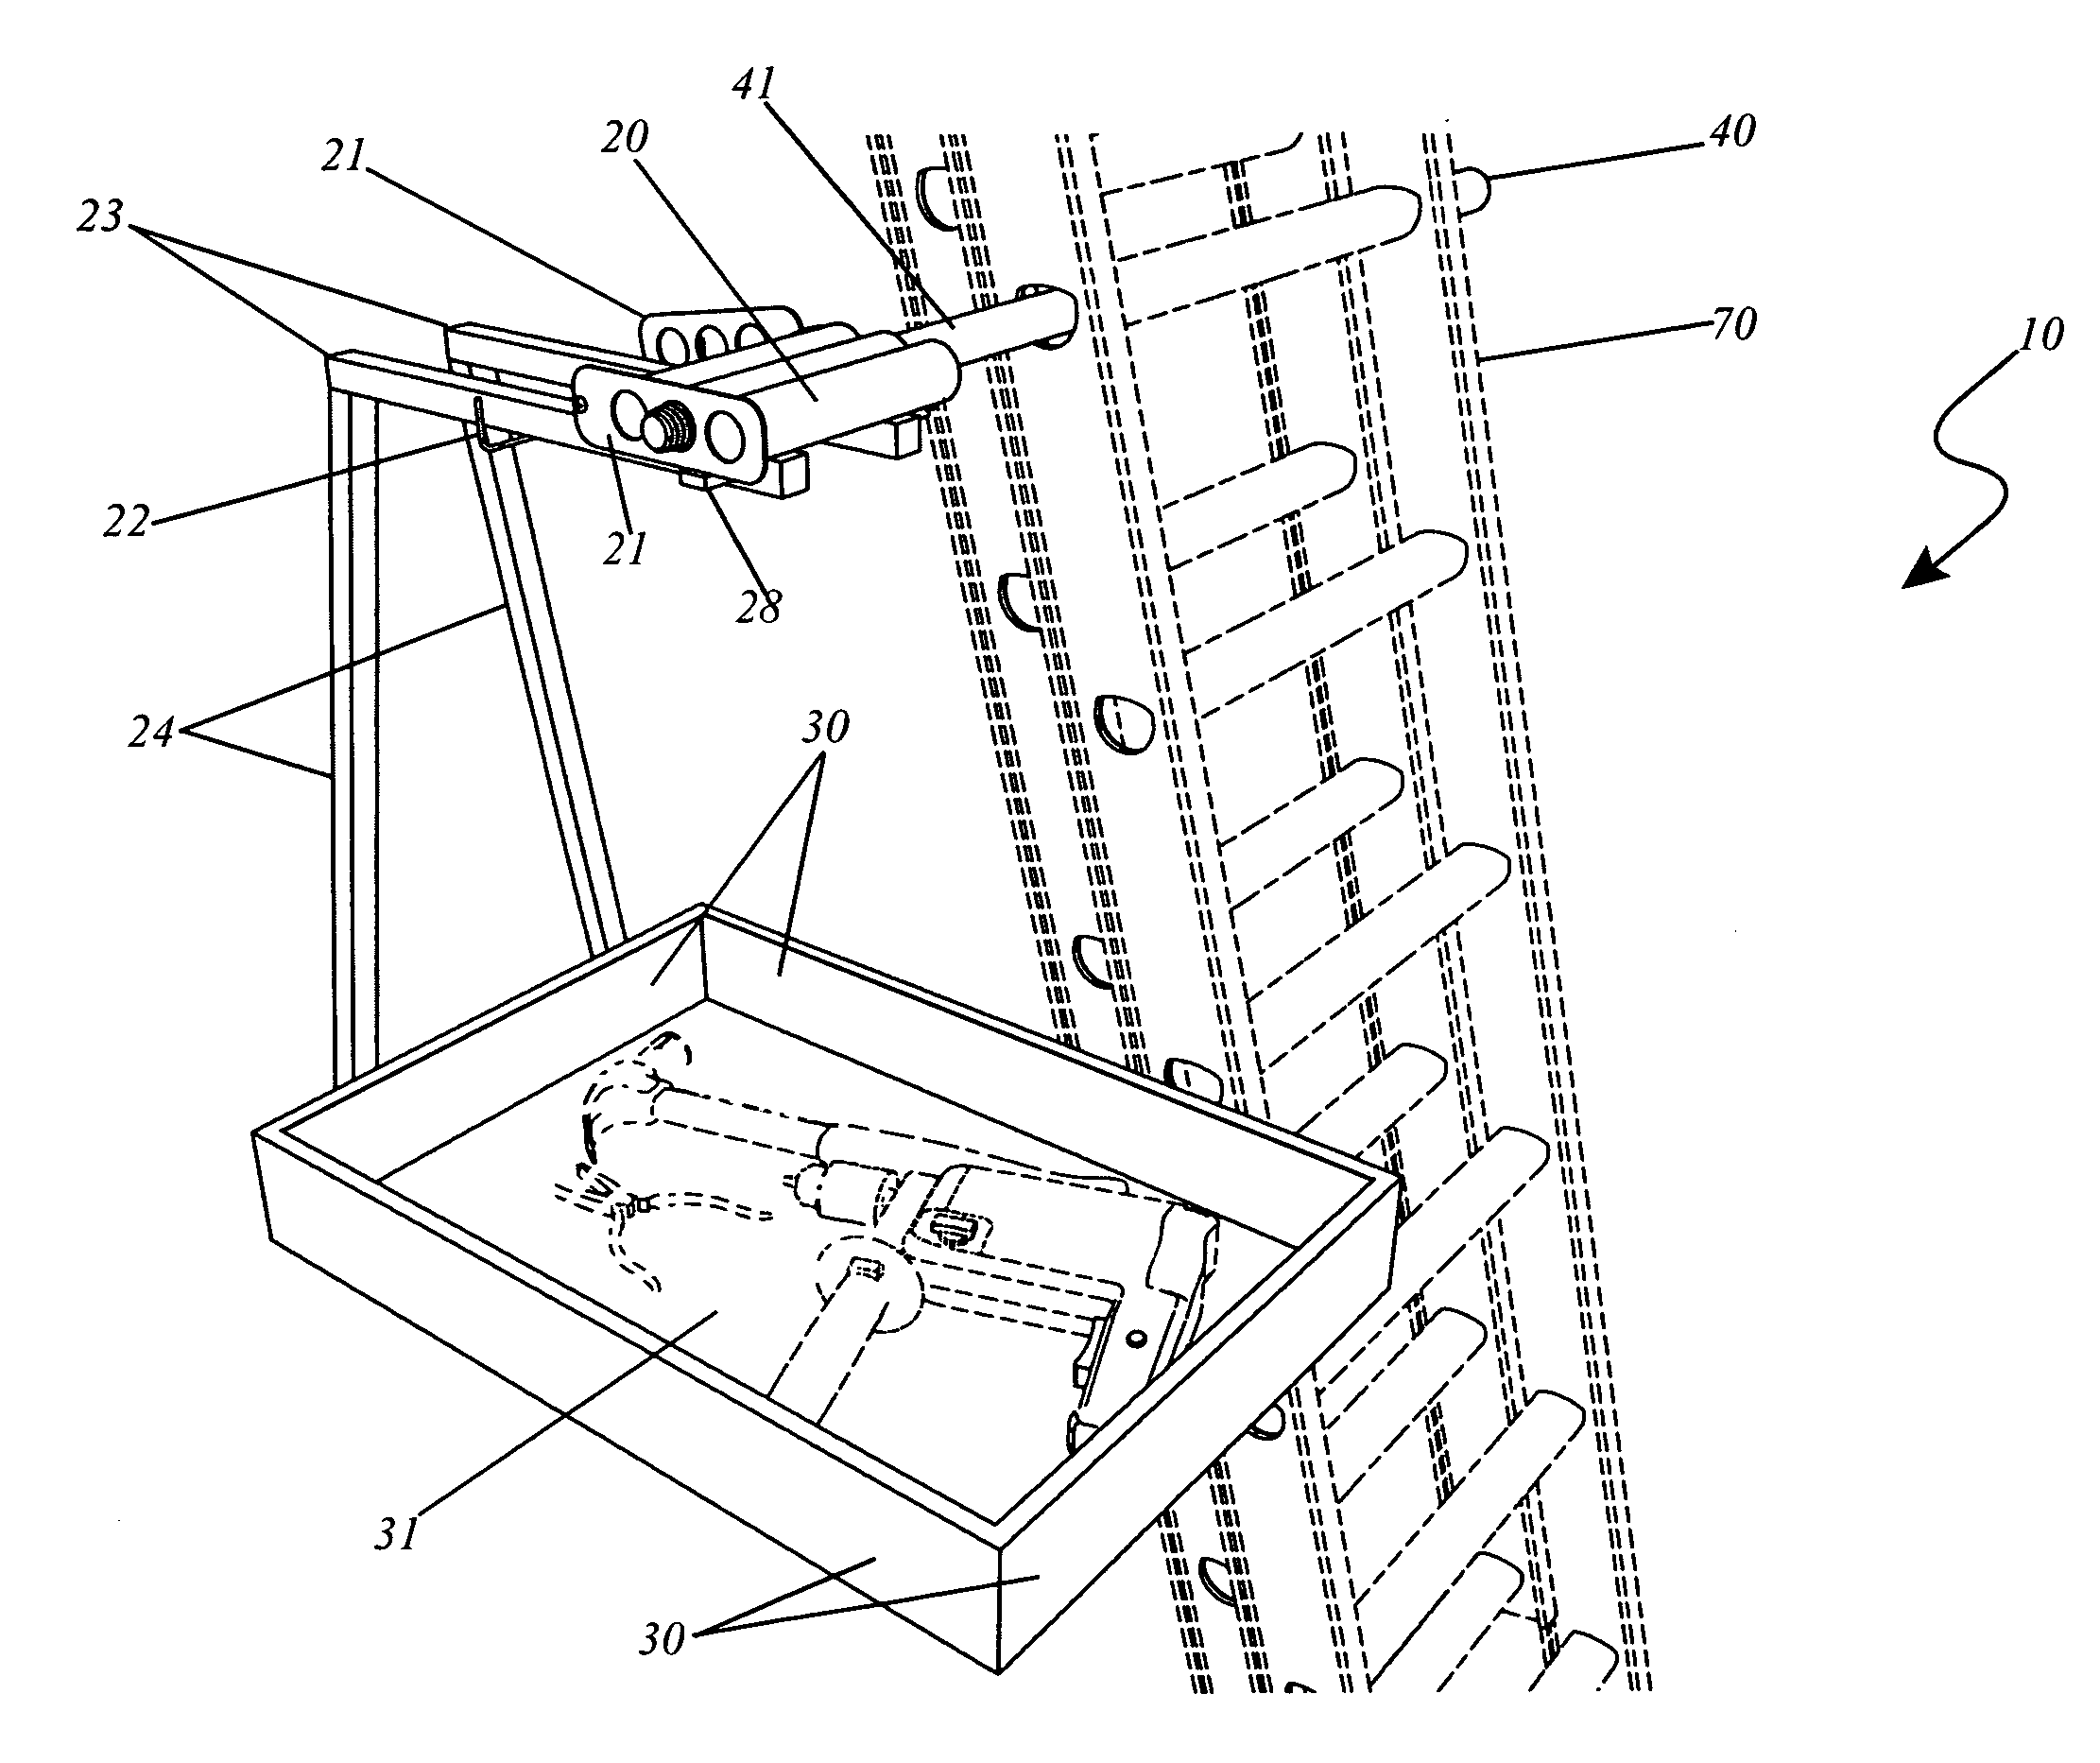 Paint tray caddy for extension ladders and method of use thereof